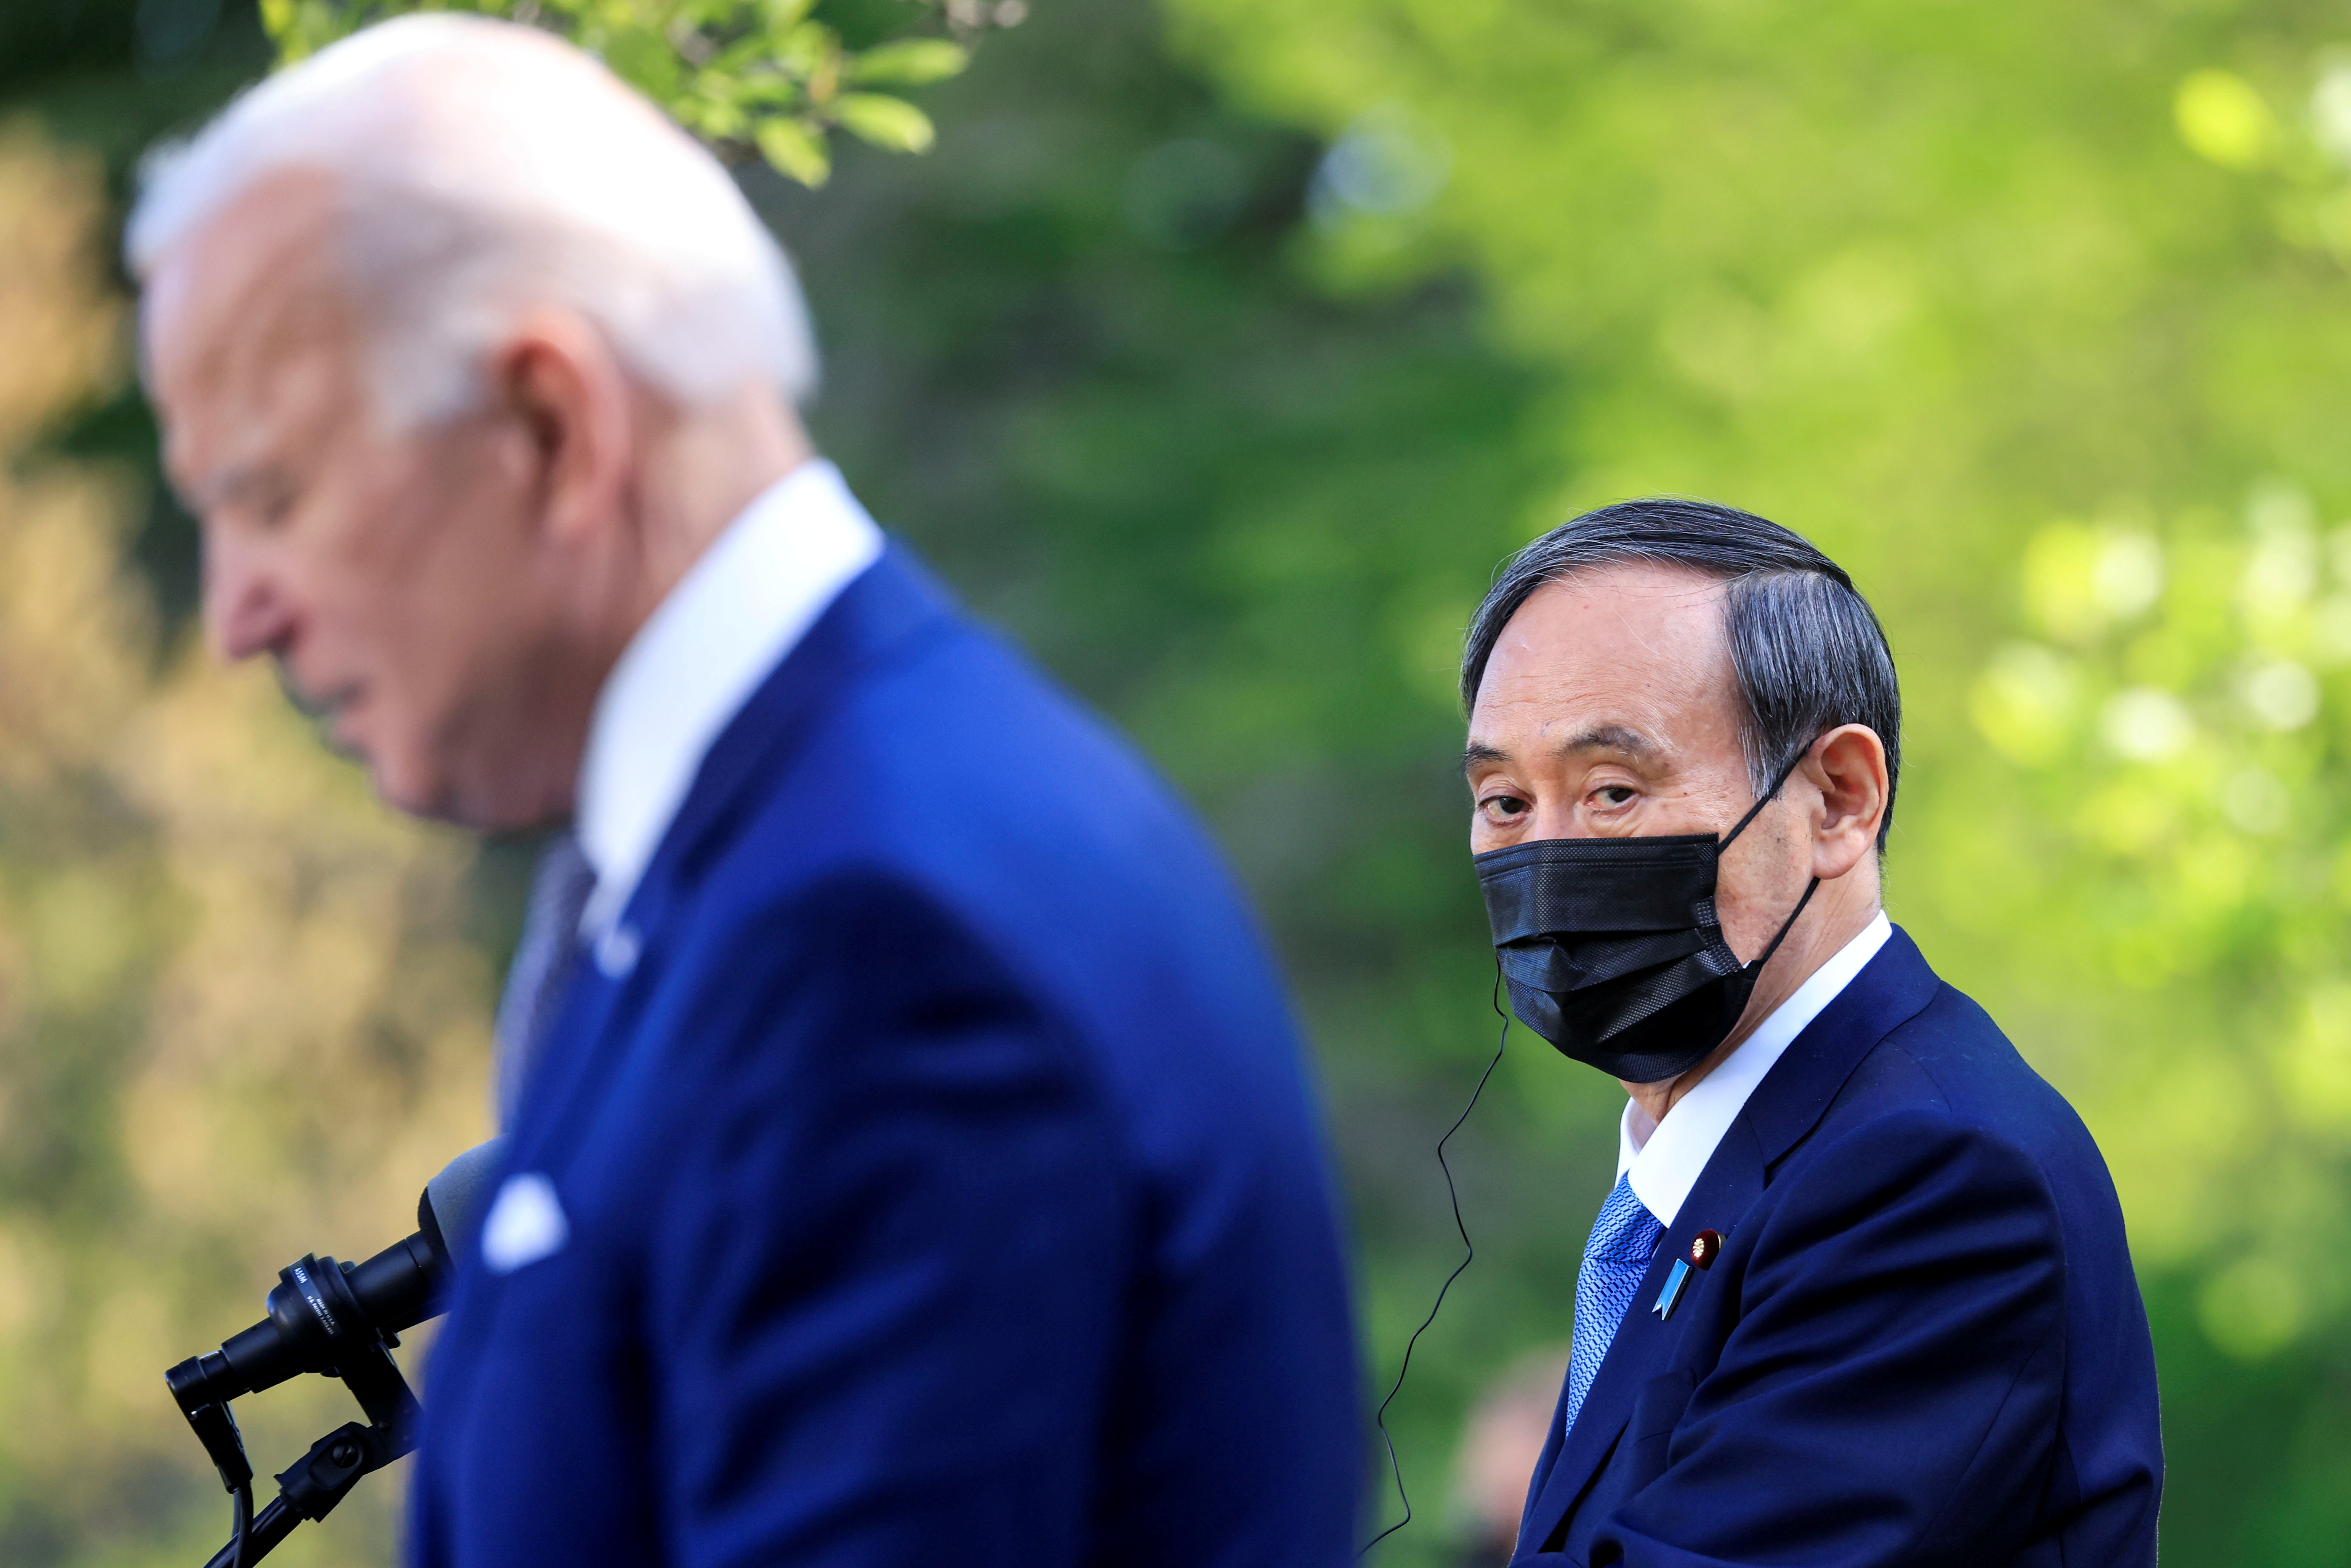 FILE PHOTO: U.S. President Biden holds joint news conference with Japan's Prime Minister Suga at the White House in Washington